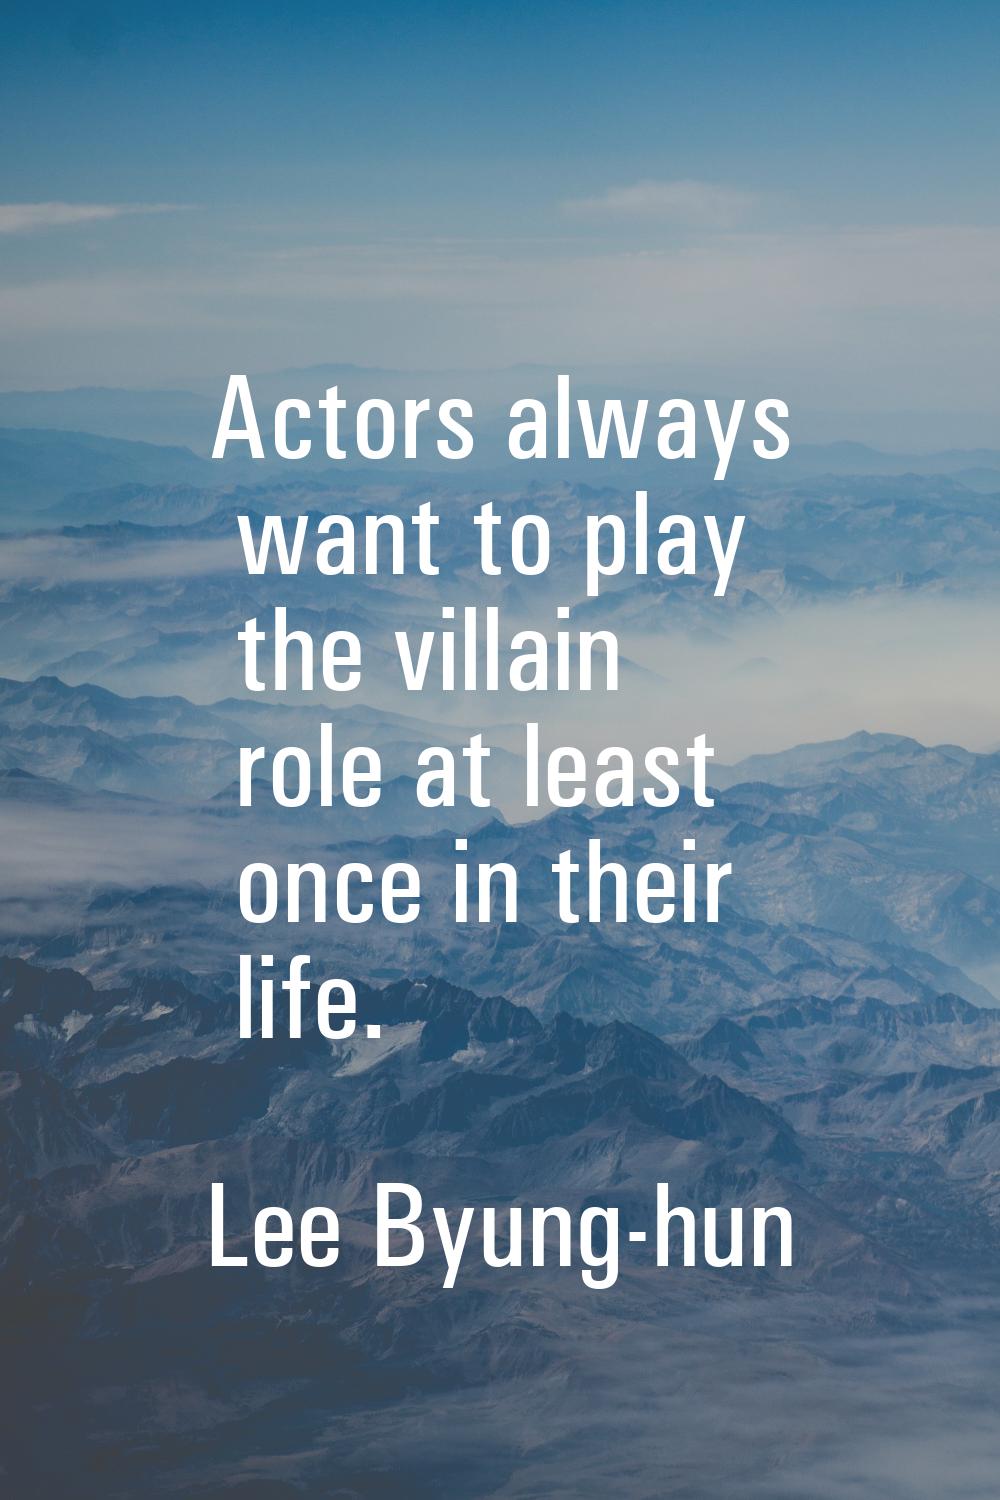 Actors always want to play the villain role at least once in their life.